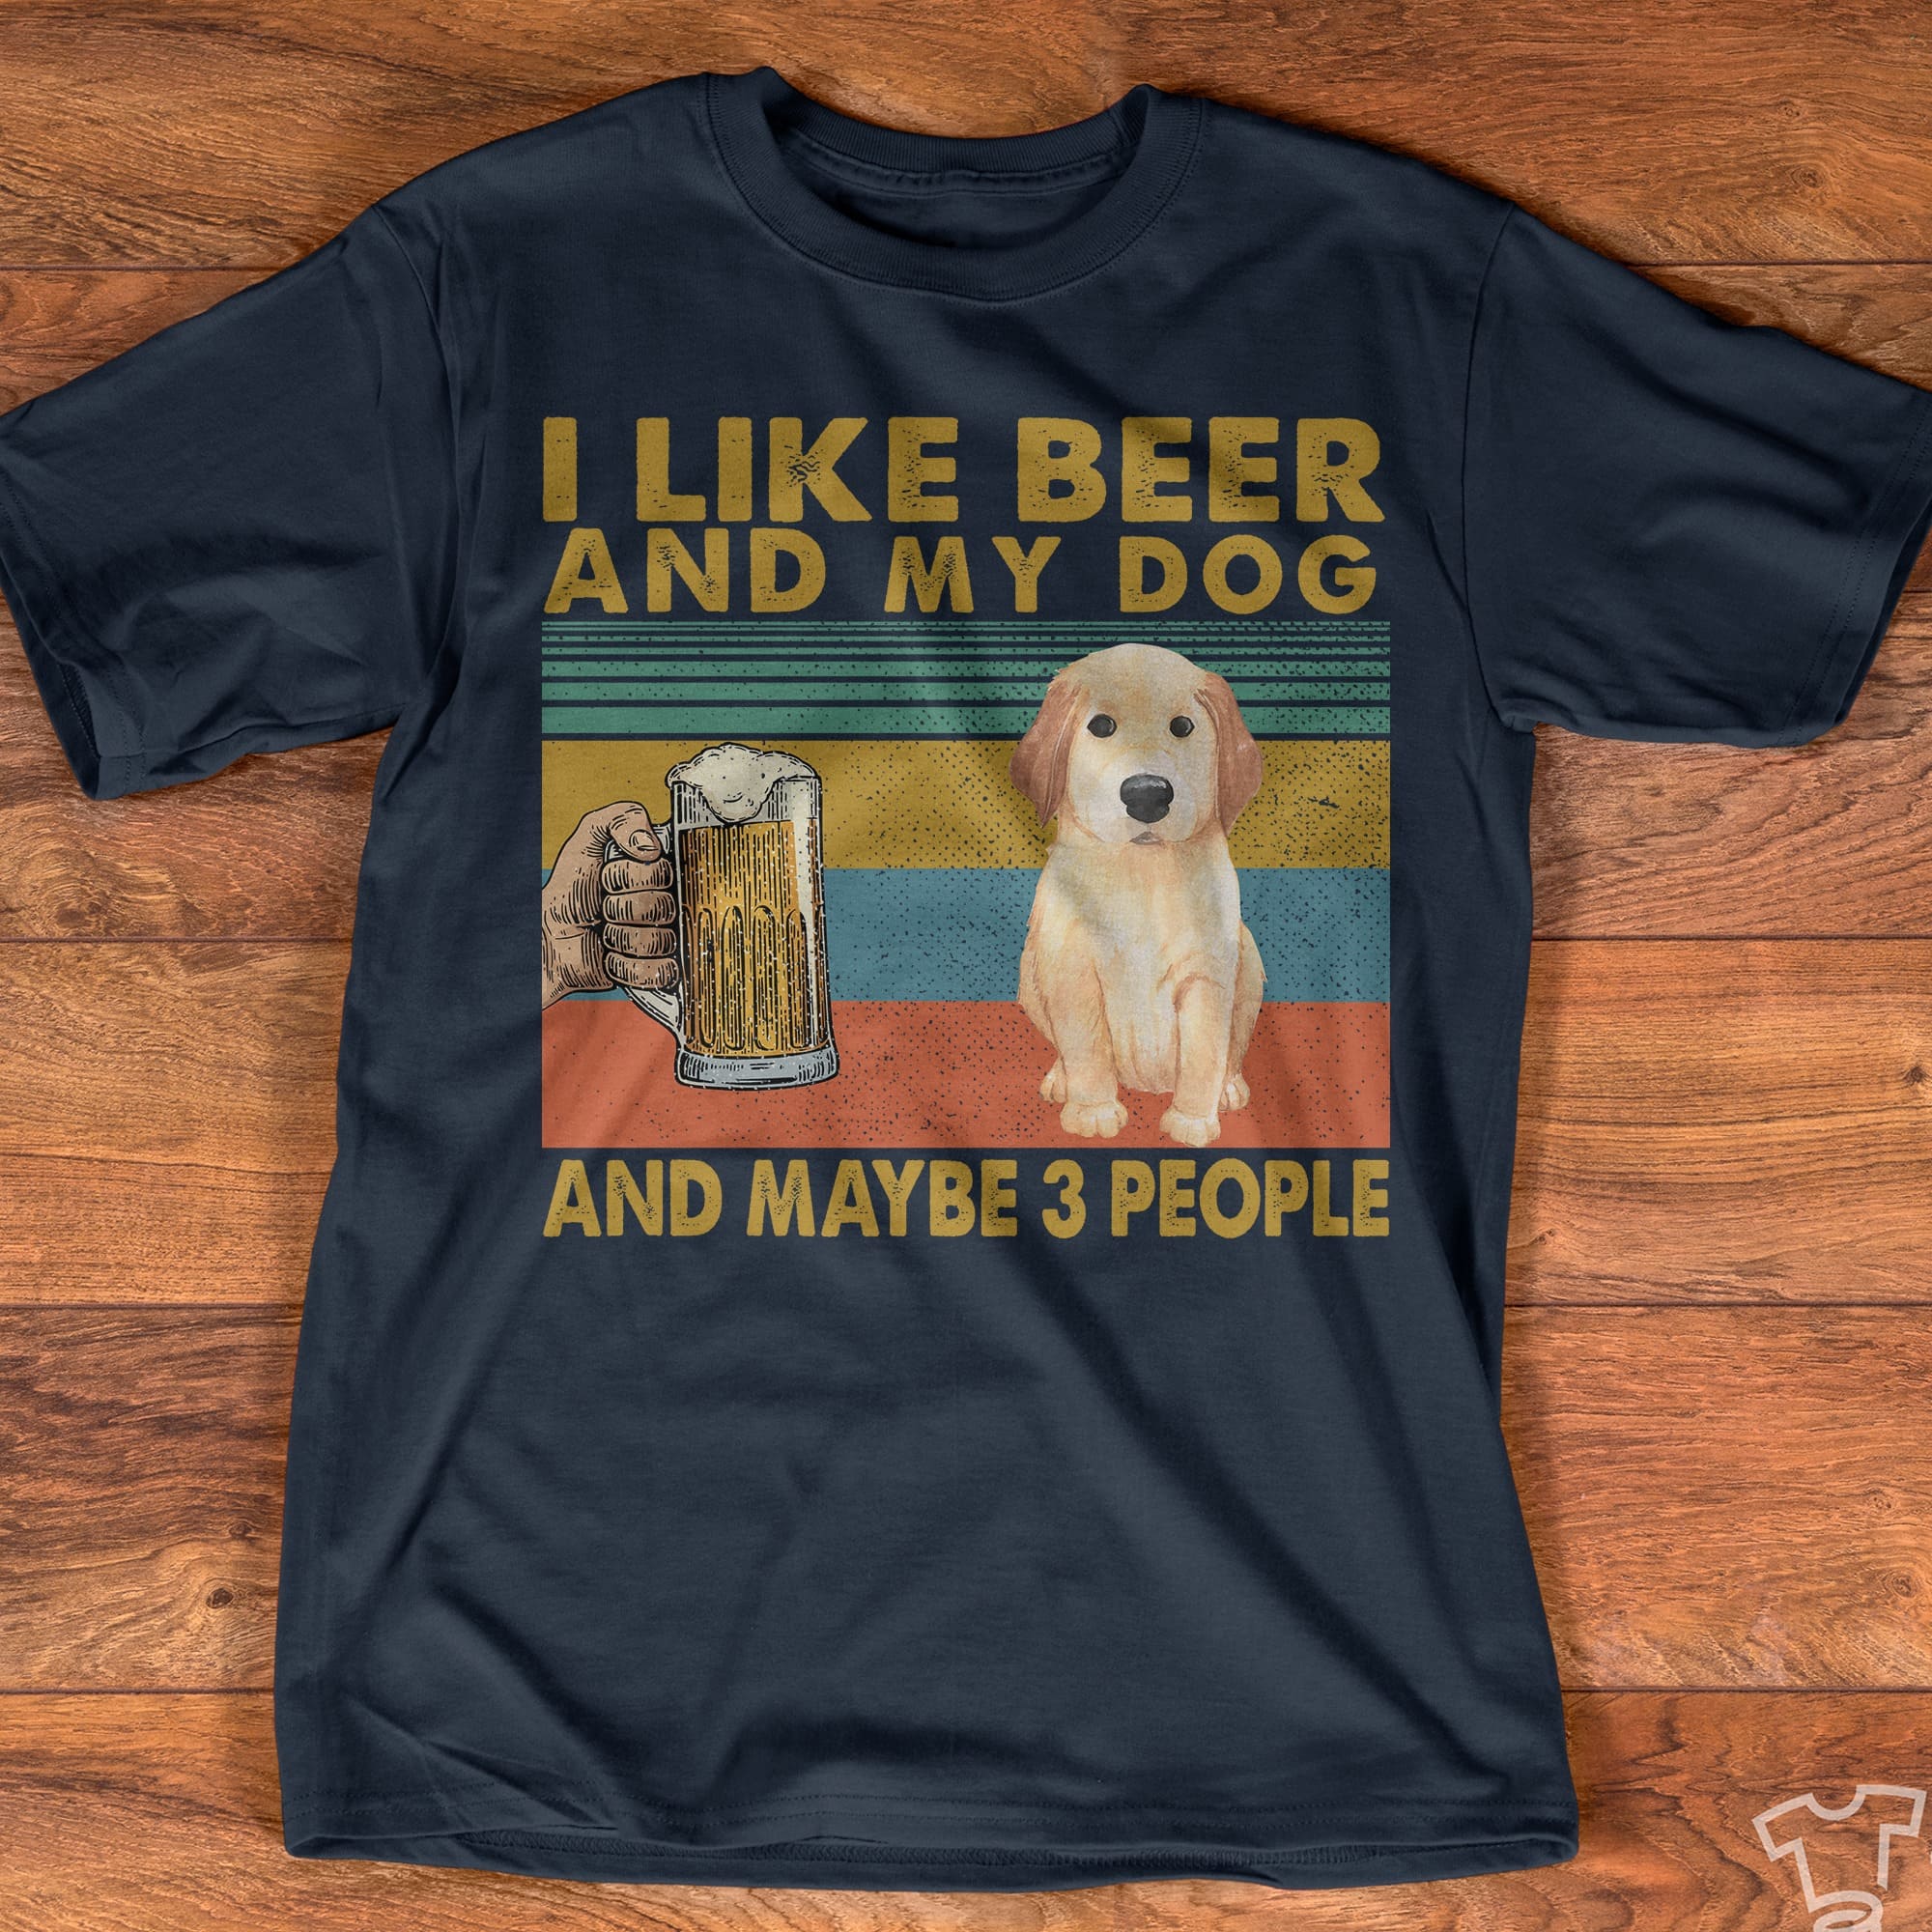 I like beer and my dog and maybe 3 people - Beer and dog, T-shirt for beer drinker